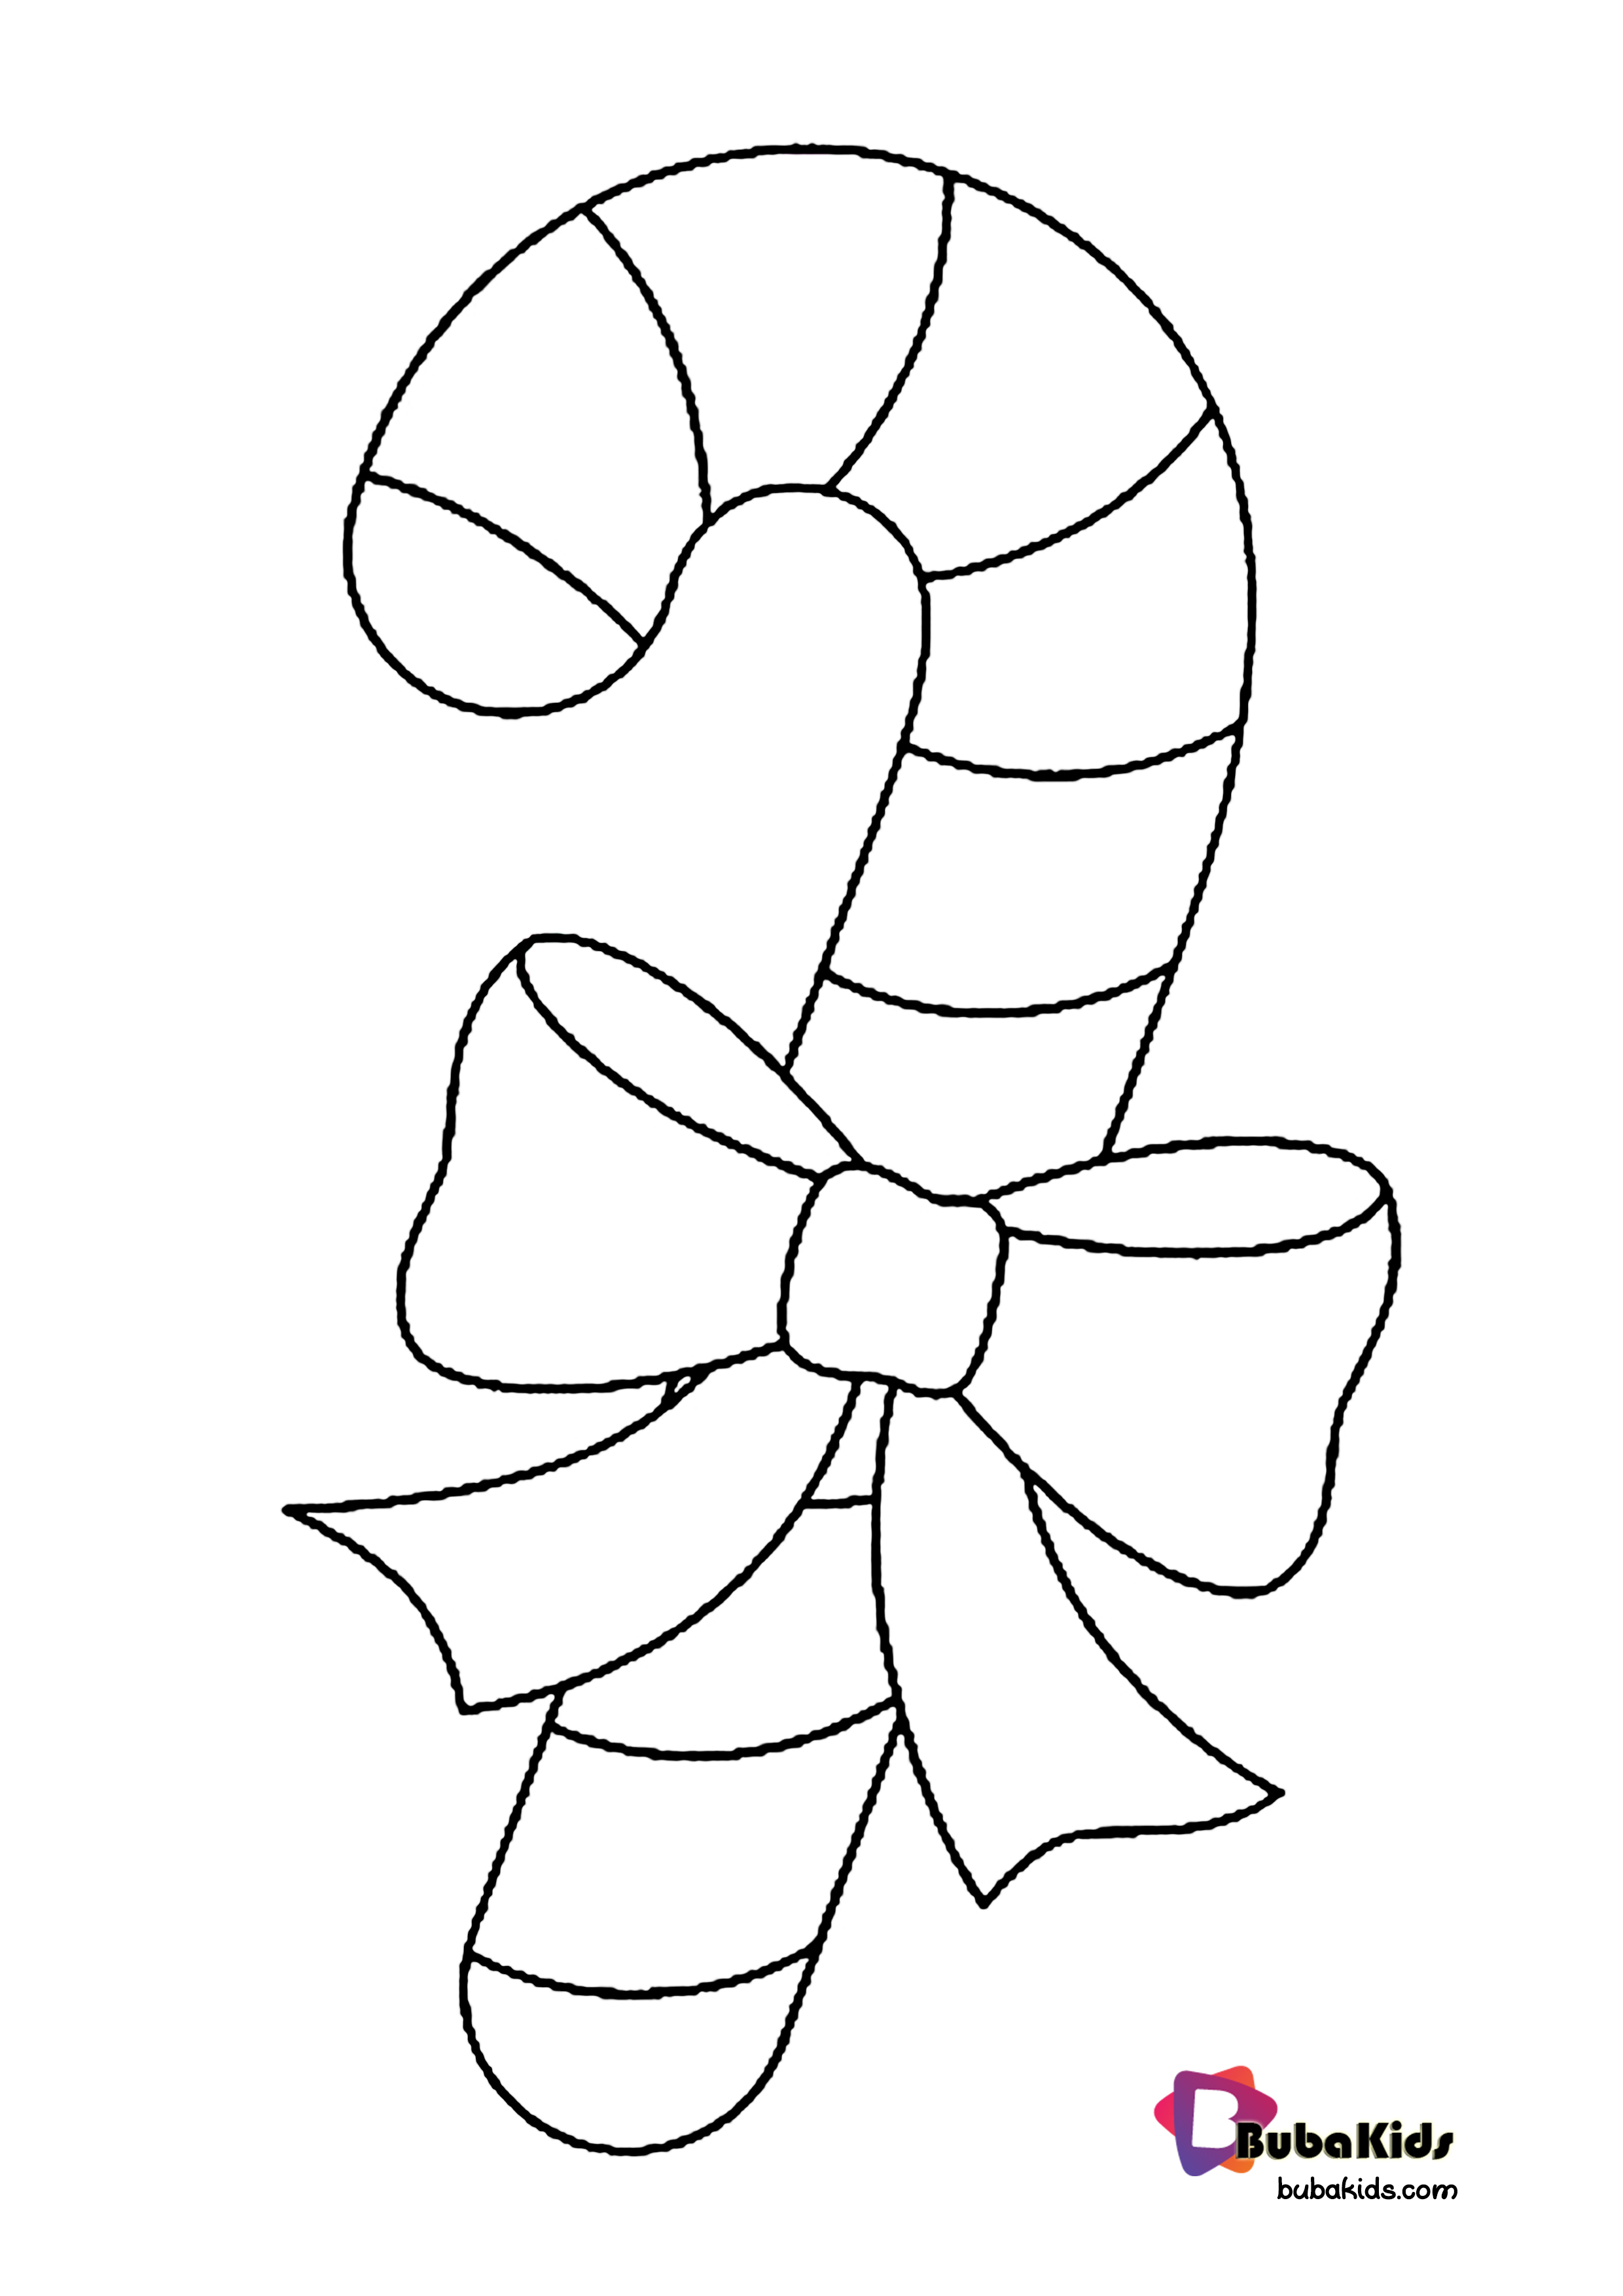 Christmas Ornament Coloring Page - BubaKids.com